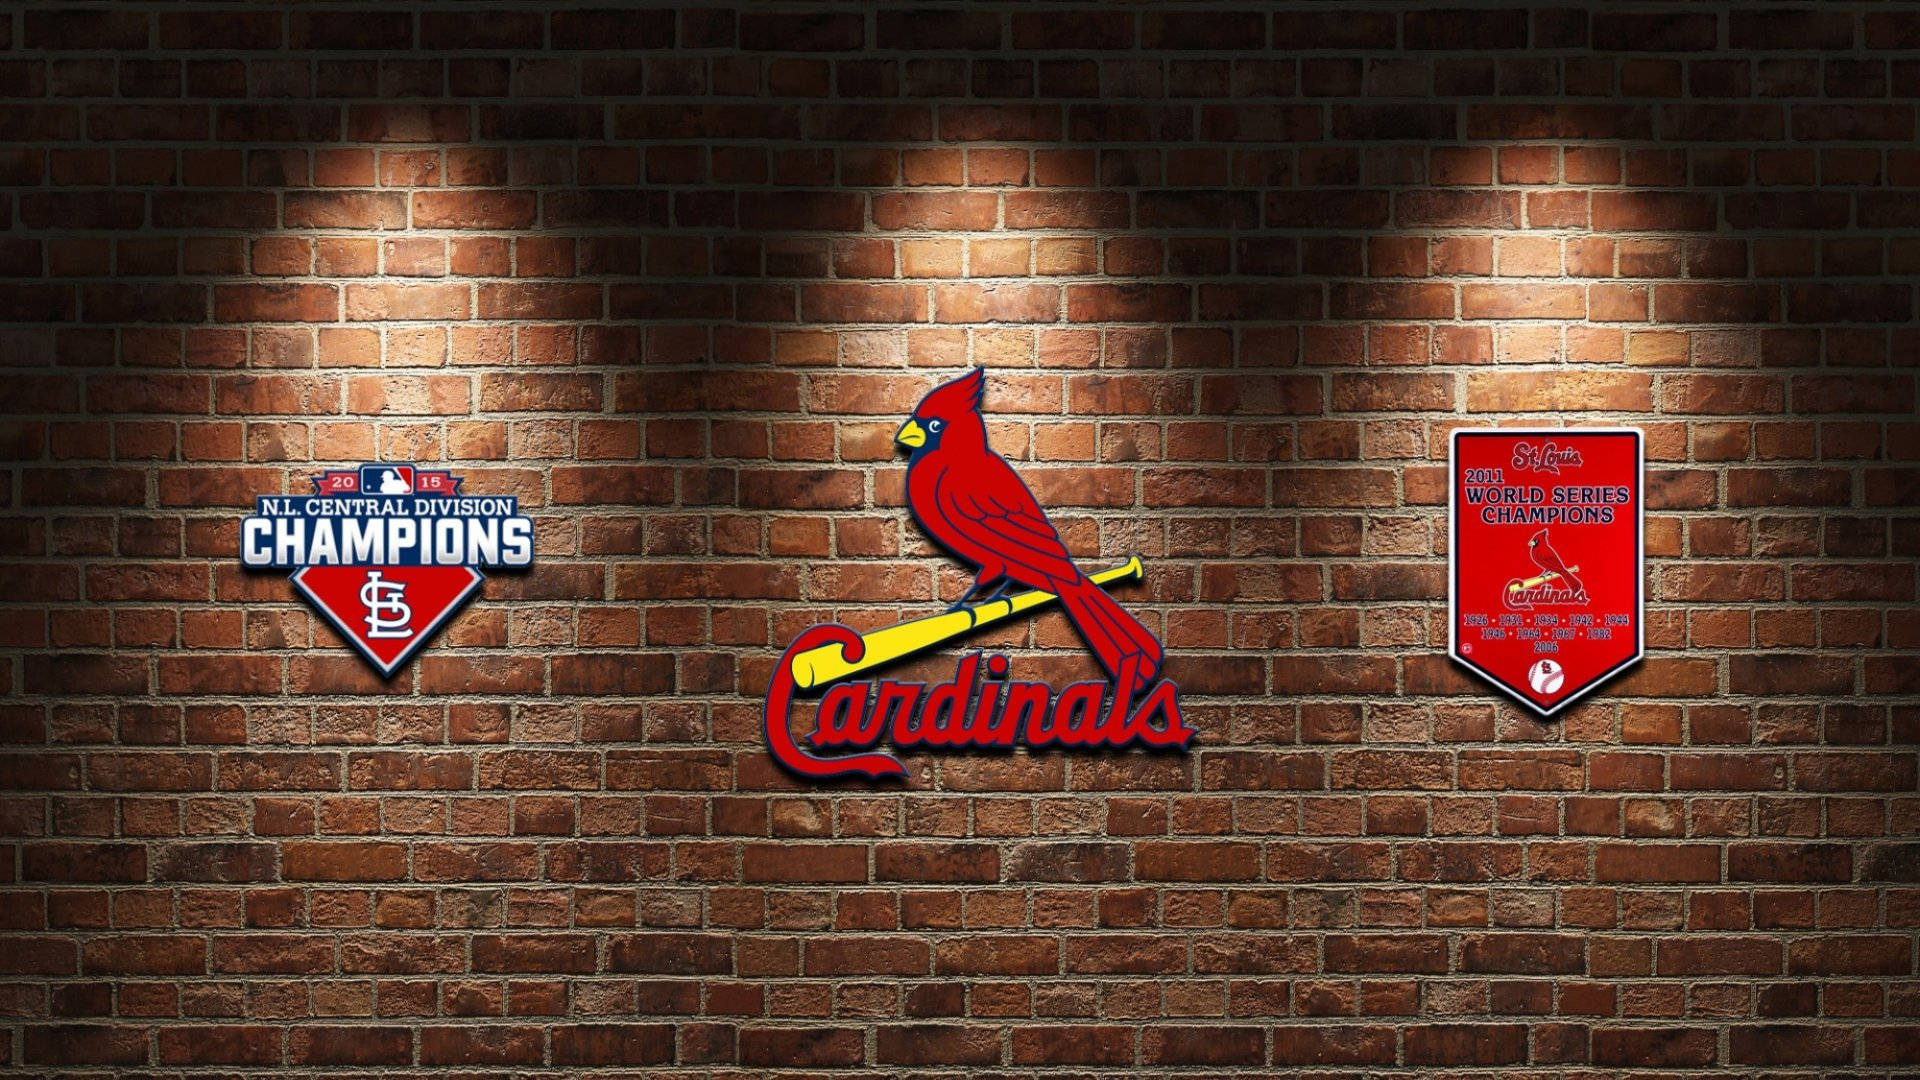 St Louis Cardinals Symbols And Awards Background